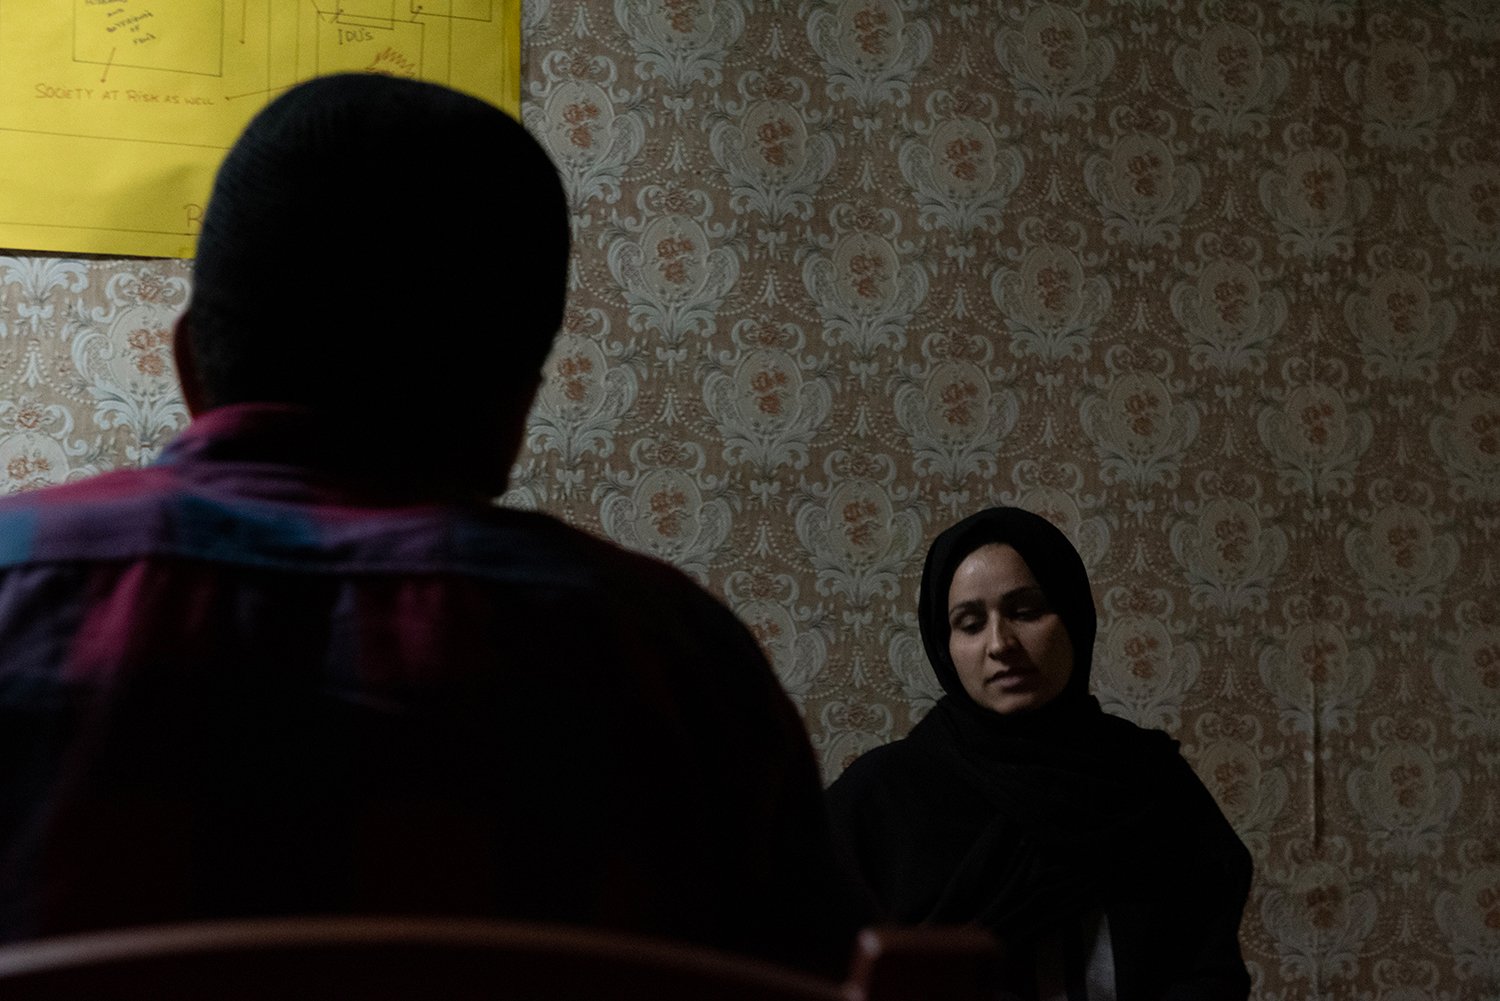  A service user (foreground) talks to a social worker (background) during a counseling session in a drug de-addiction center in Kashmir. 